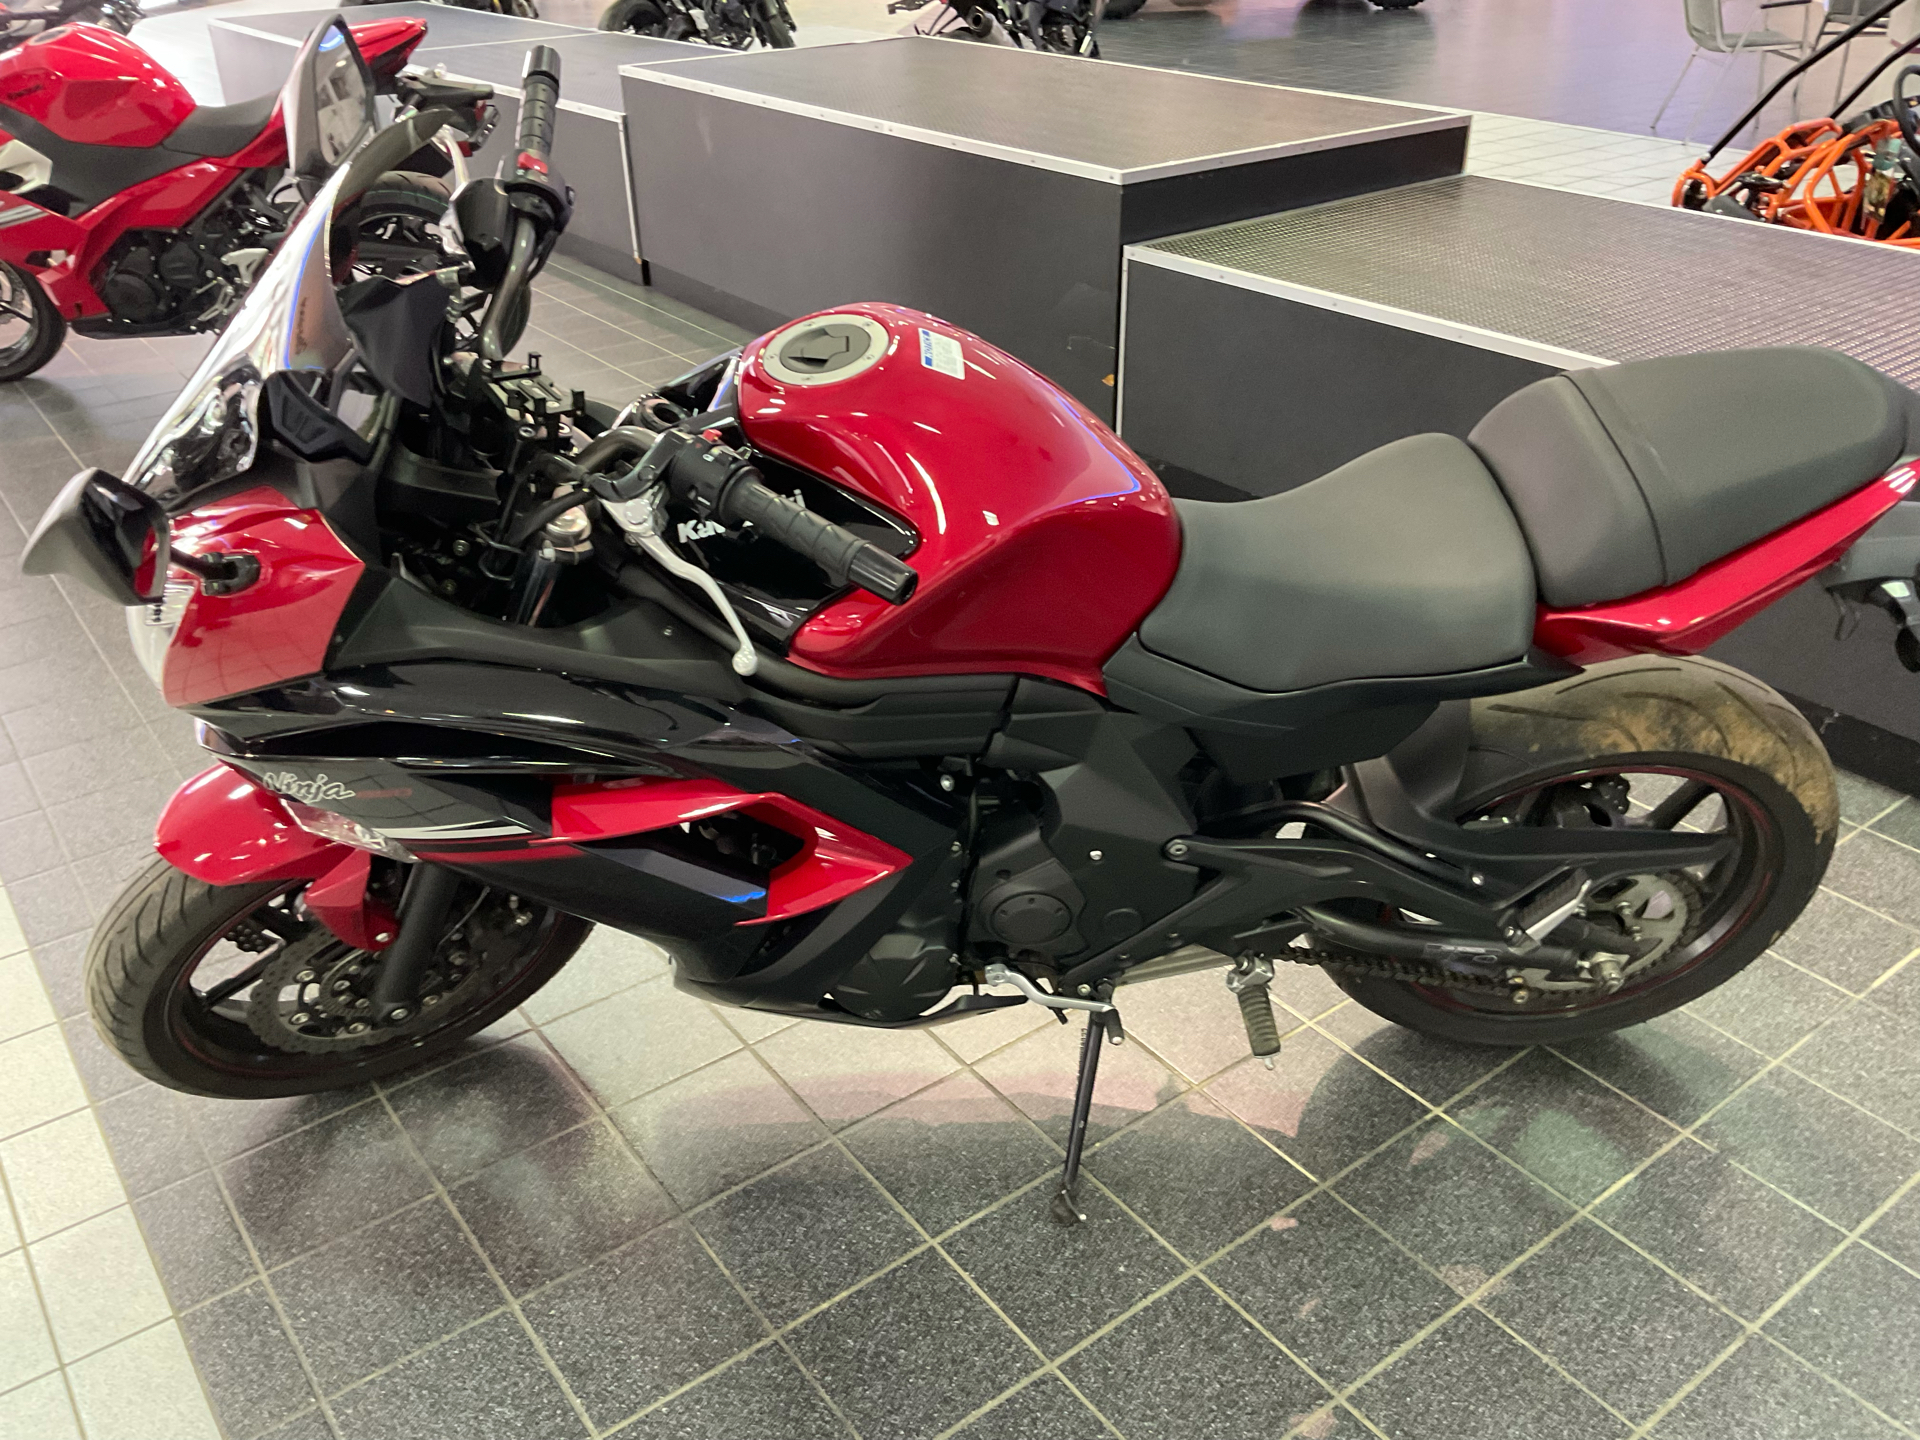 Used 2016 Kawasaki Ninja 650 ABS Motorcycles in Asheville NC | Candy Persimmon Red / Metallic Spark Black A29427